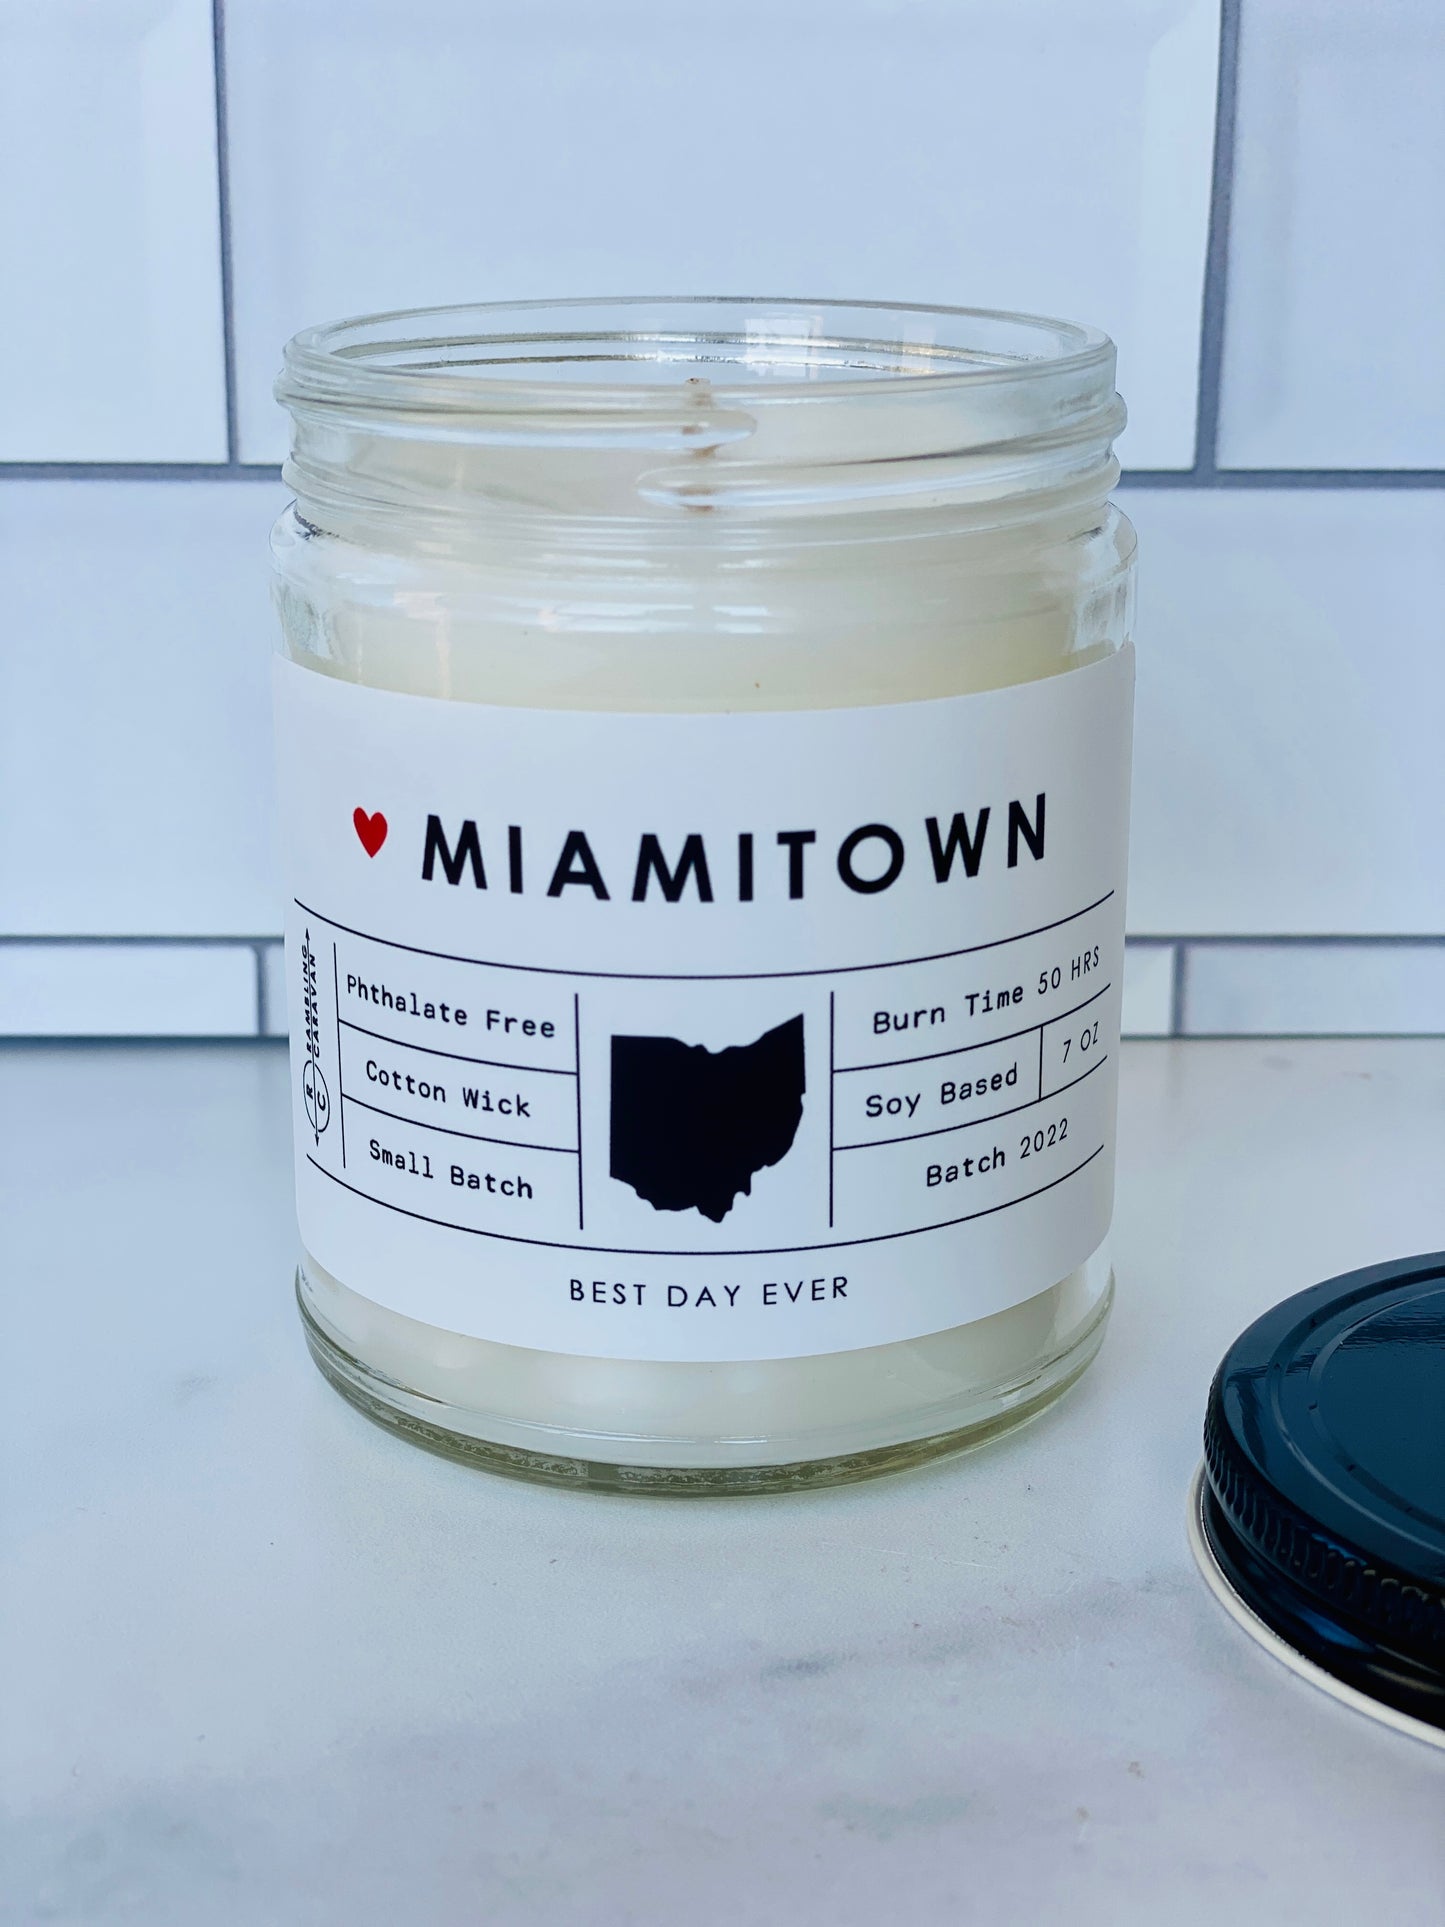 Miamitown, OH Candle